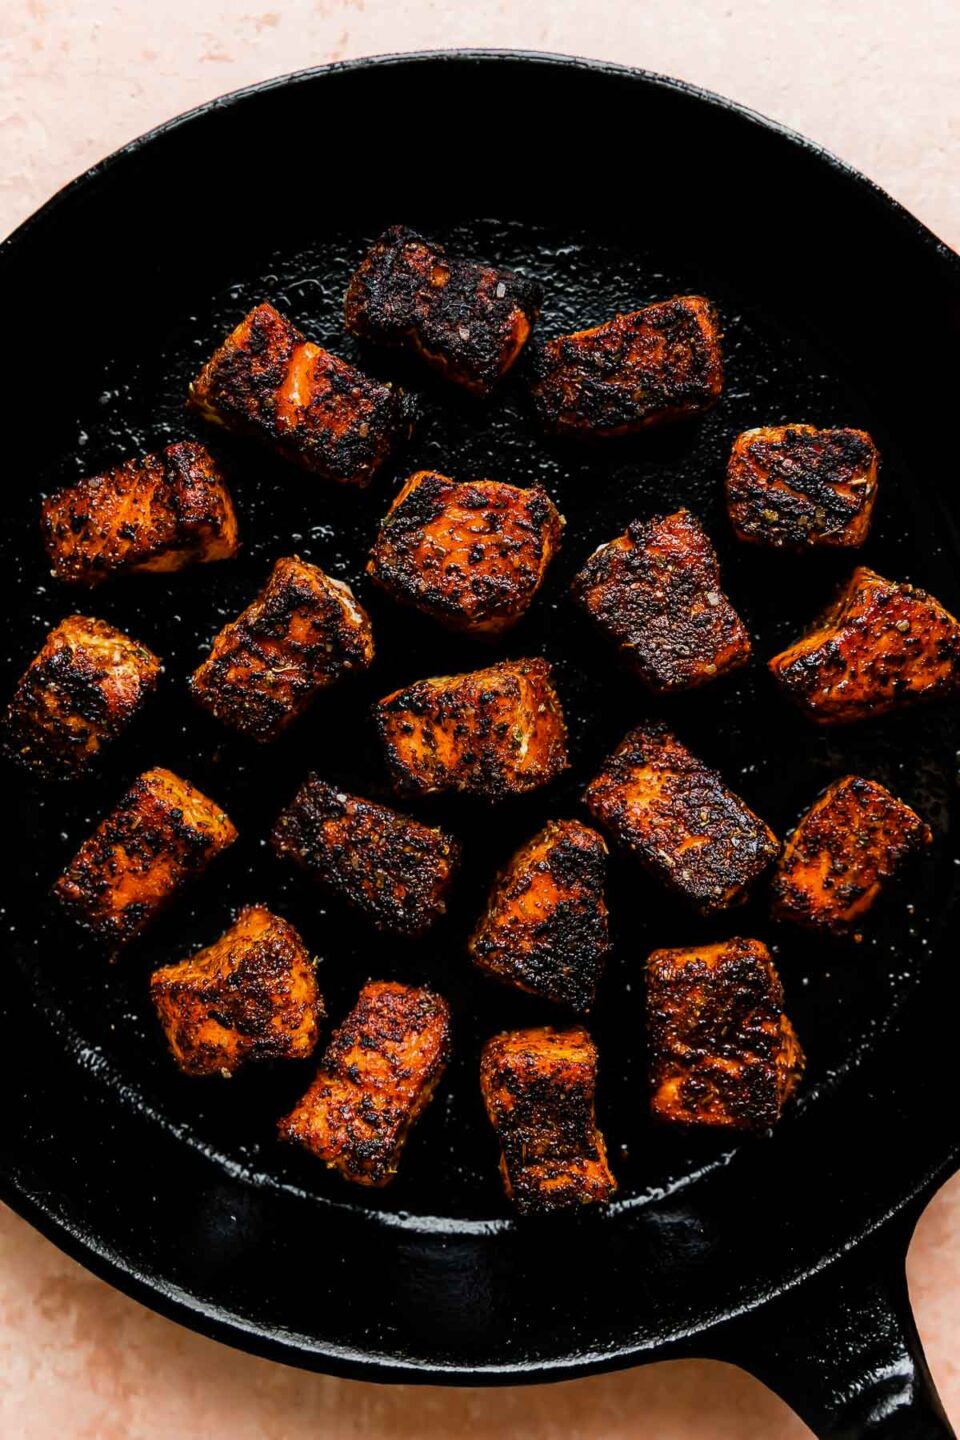 Seared cubed salmon fills a large black cast iron skillet that sits atop a light pink textured surface.